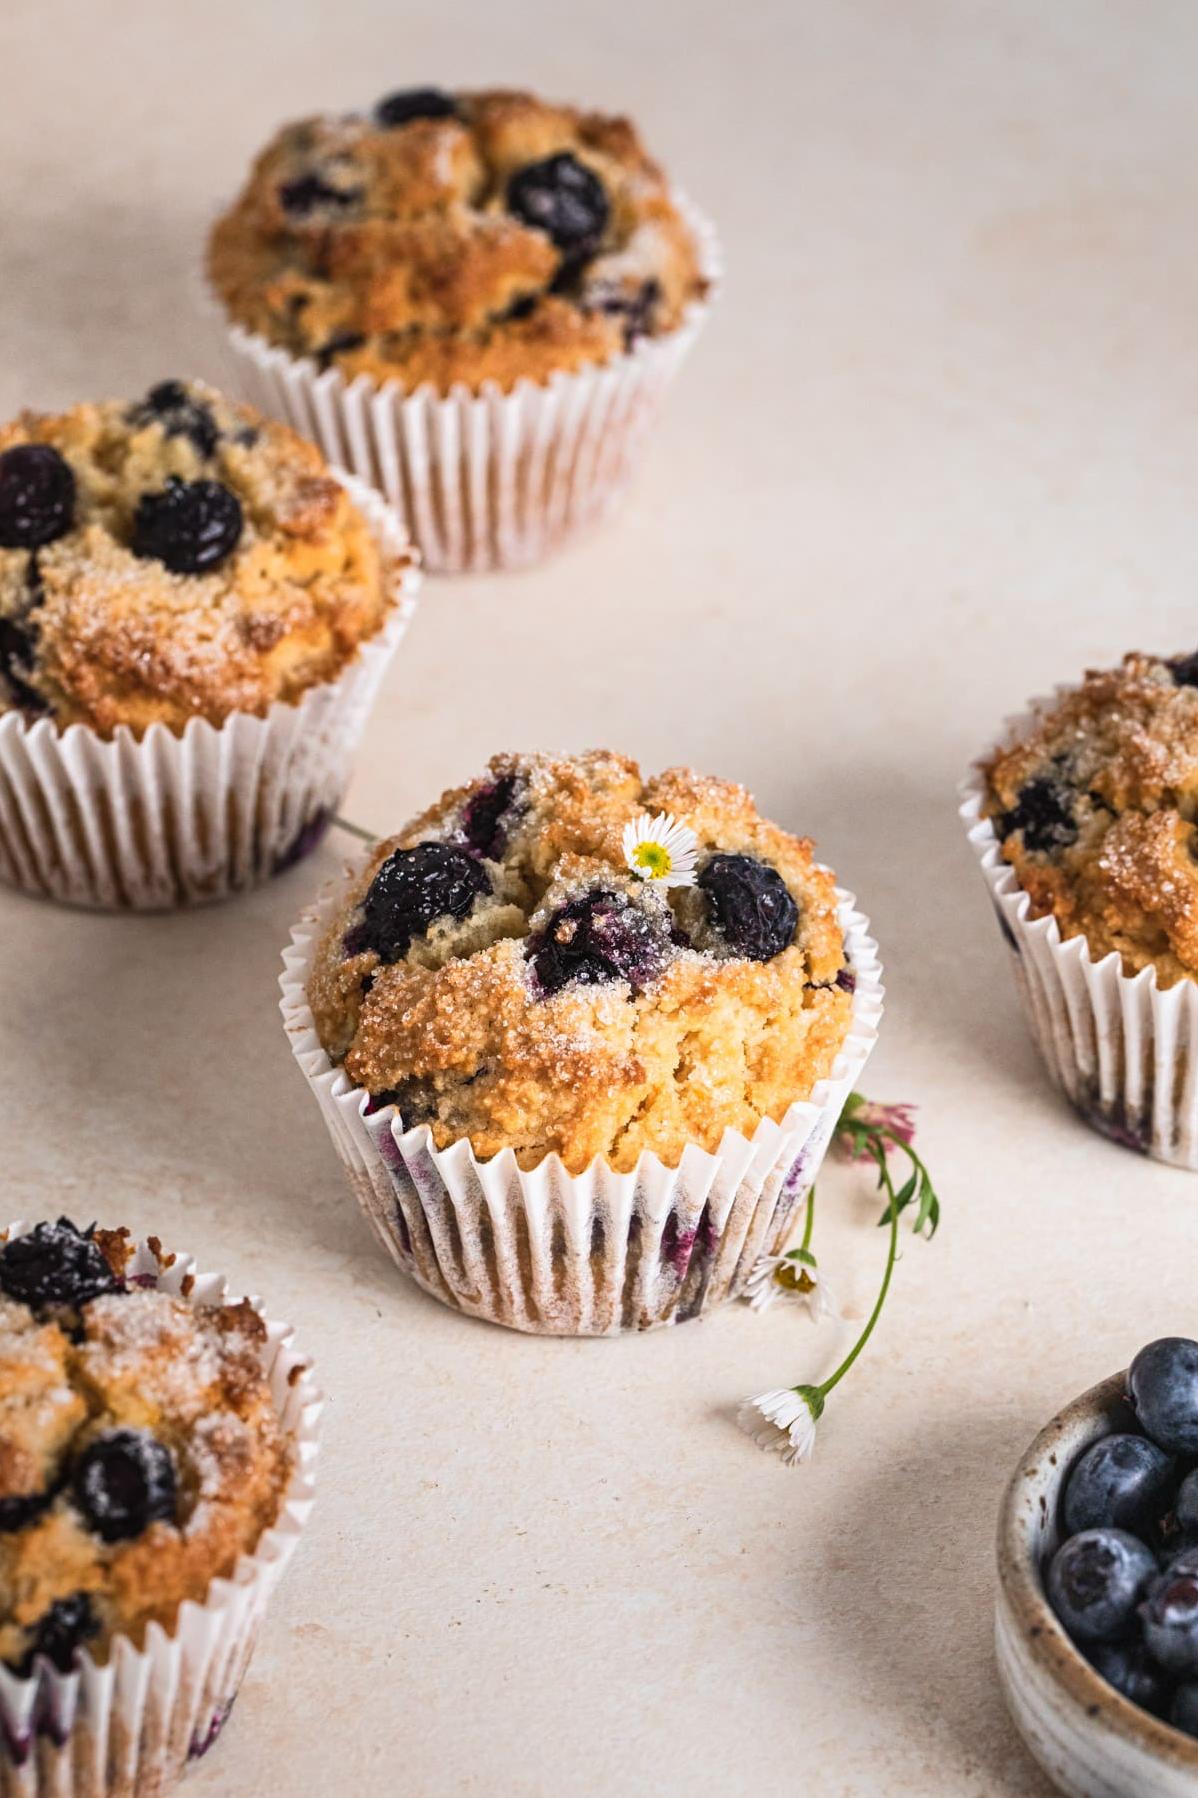  These muffins are not only healthy, but easy to make and perfect for meal prep.